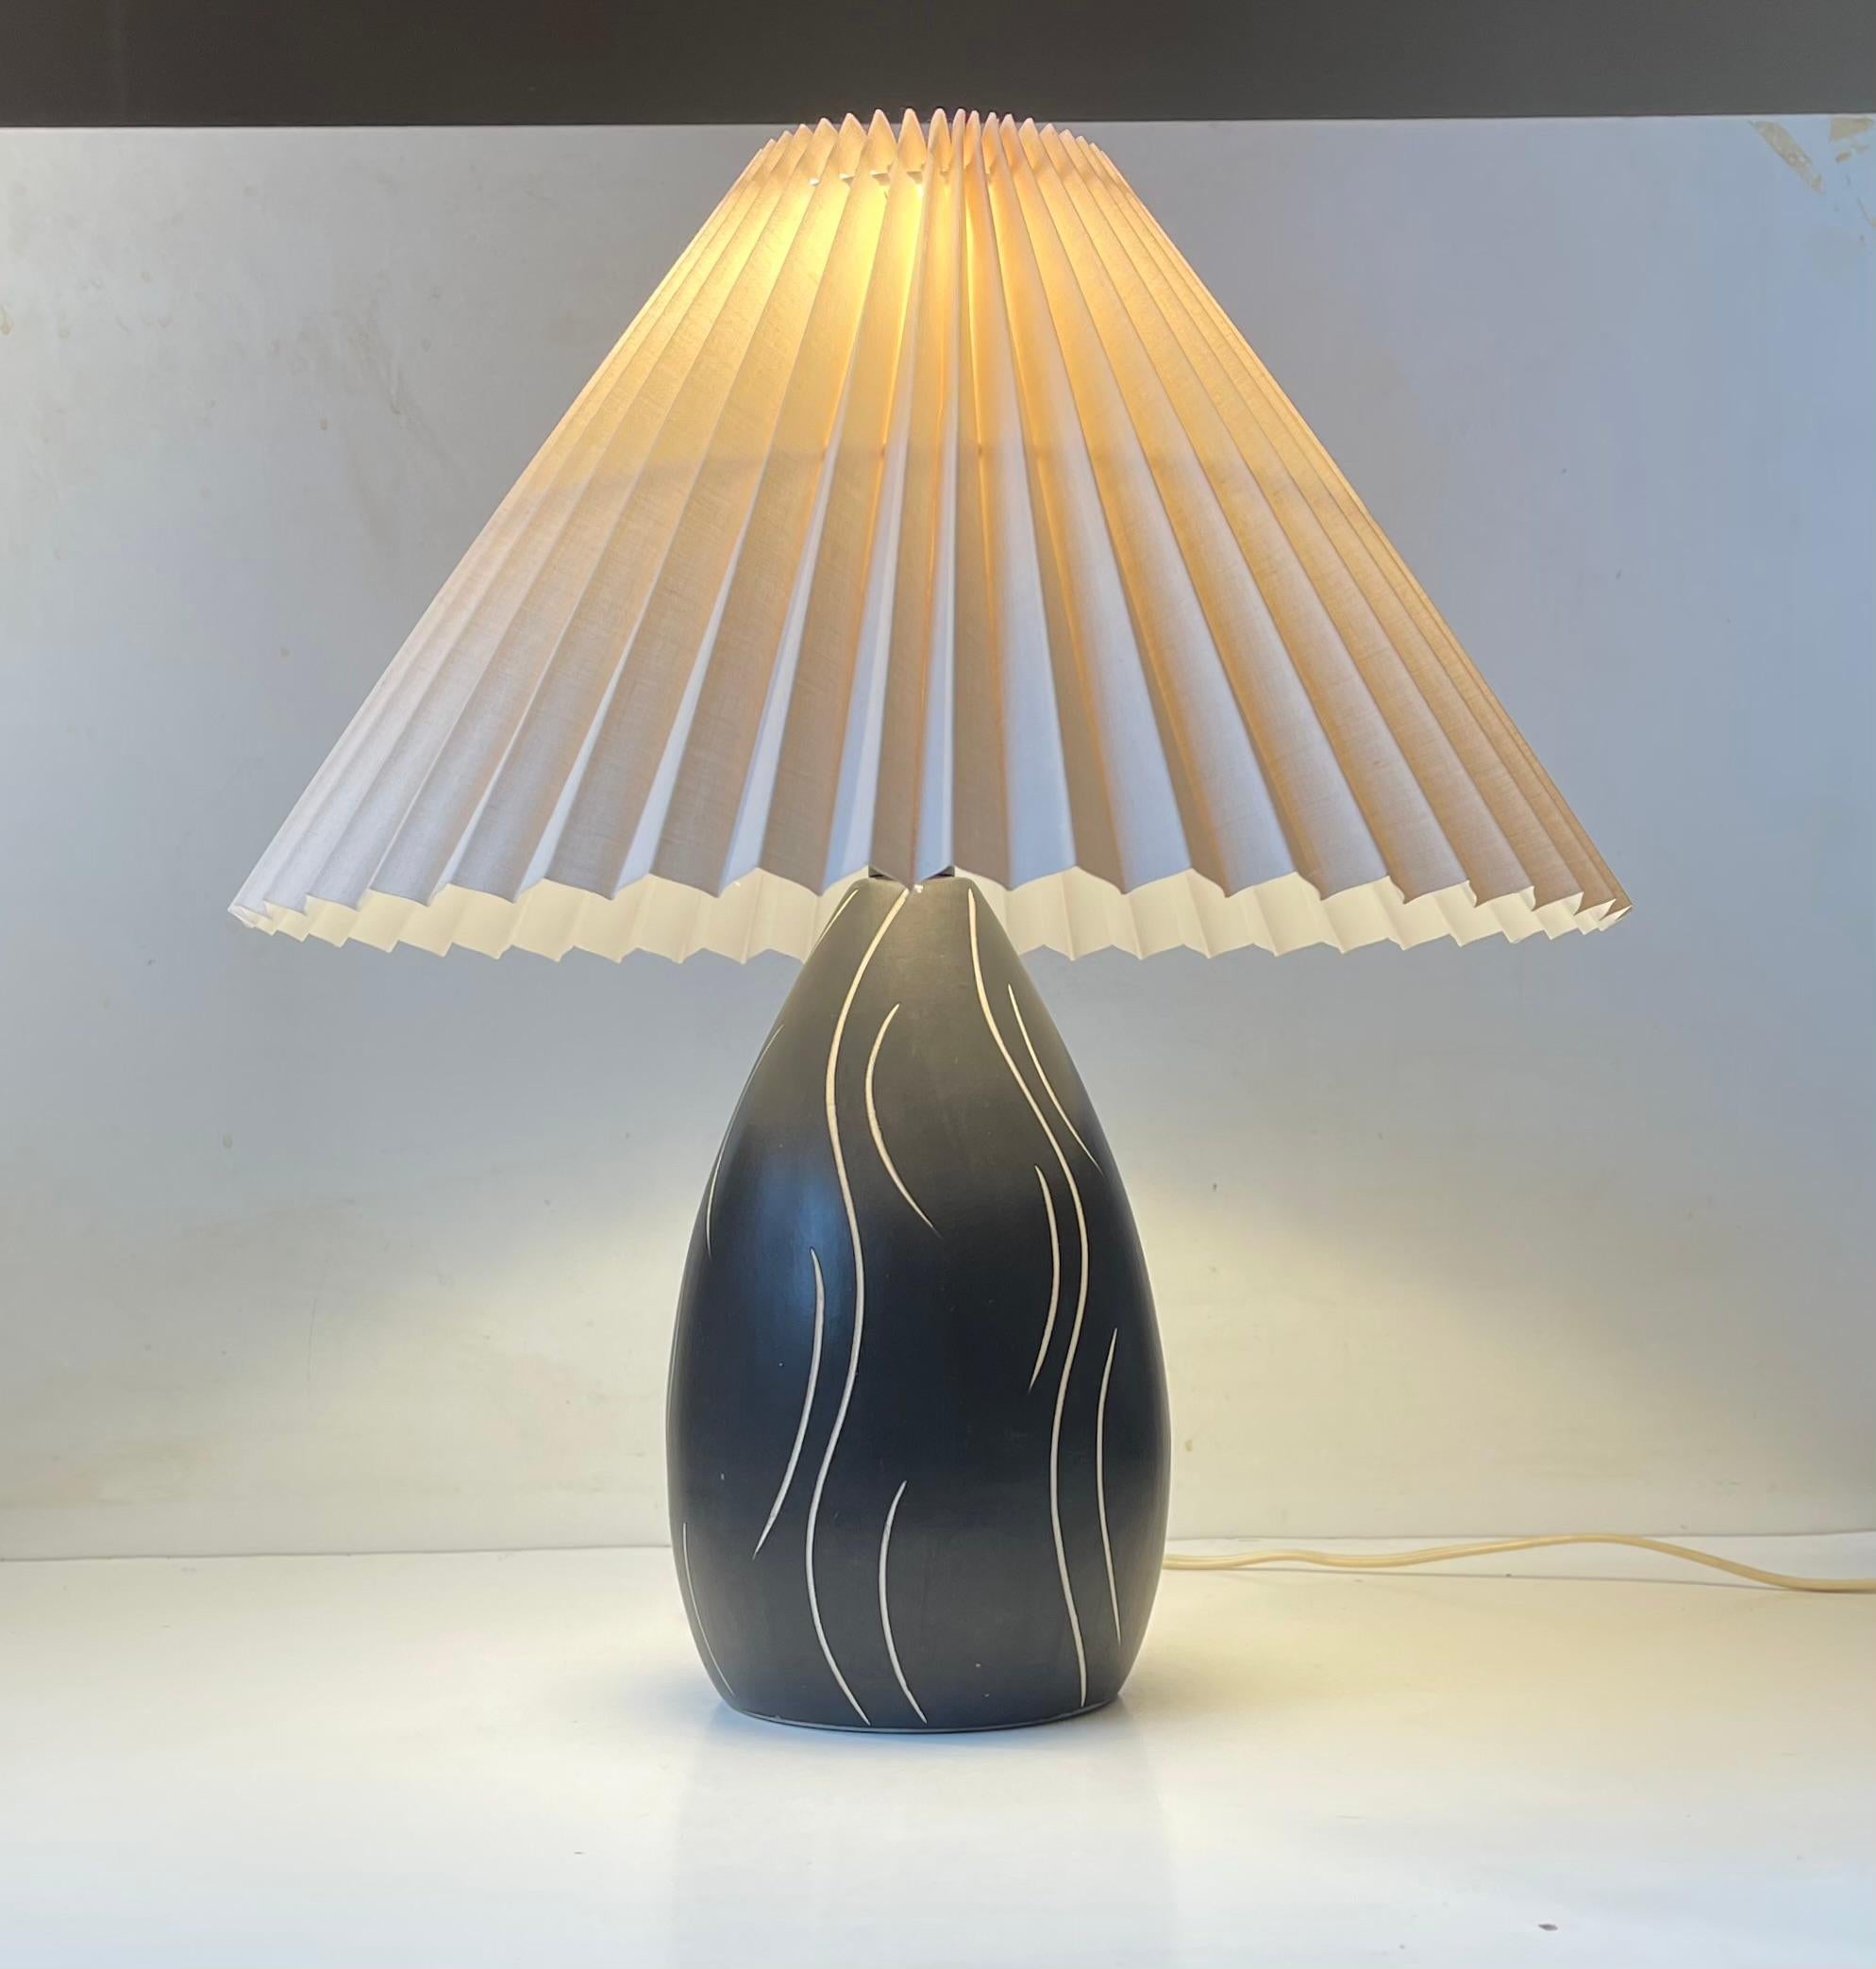 Mid-20th Century Scandinavian Modern Black White Sgrafitto Table Lamp by Elisabeth Loholt, 1950s For Sale